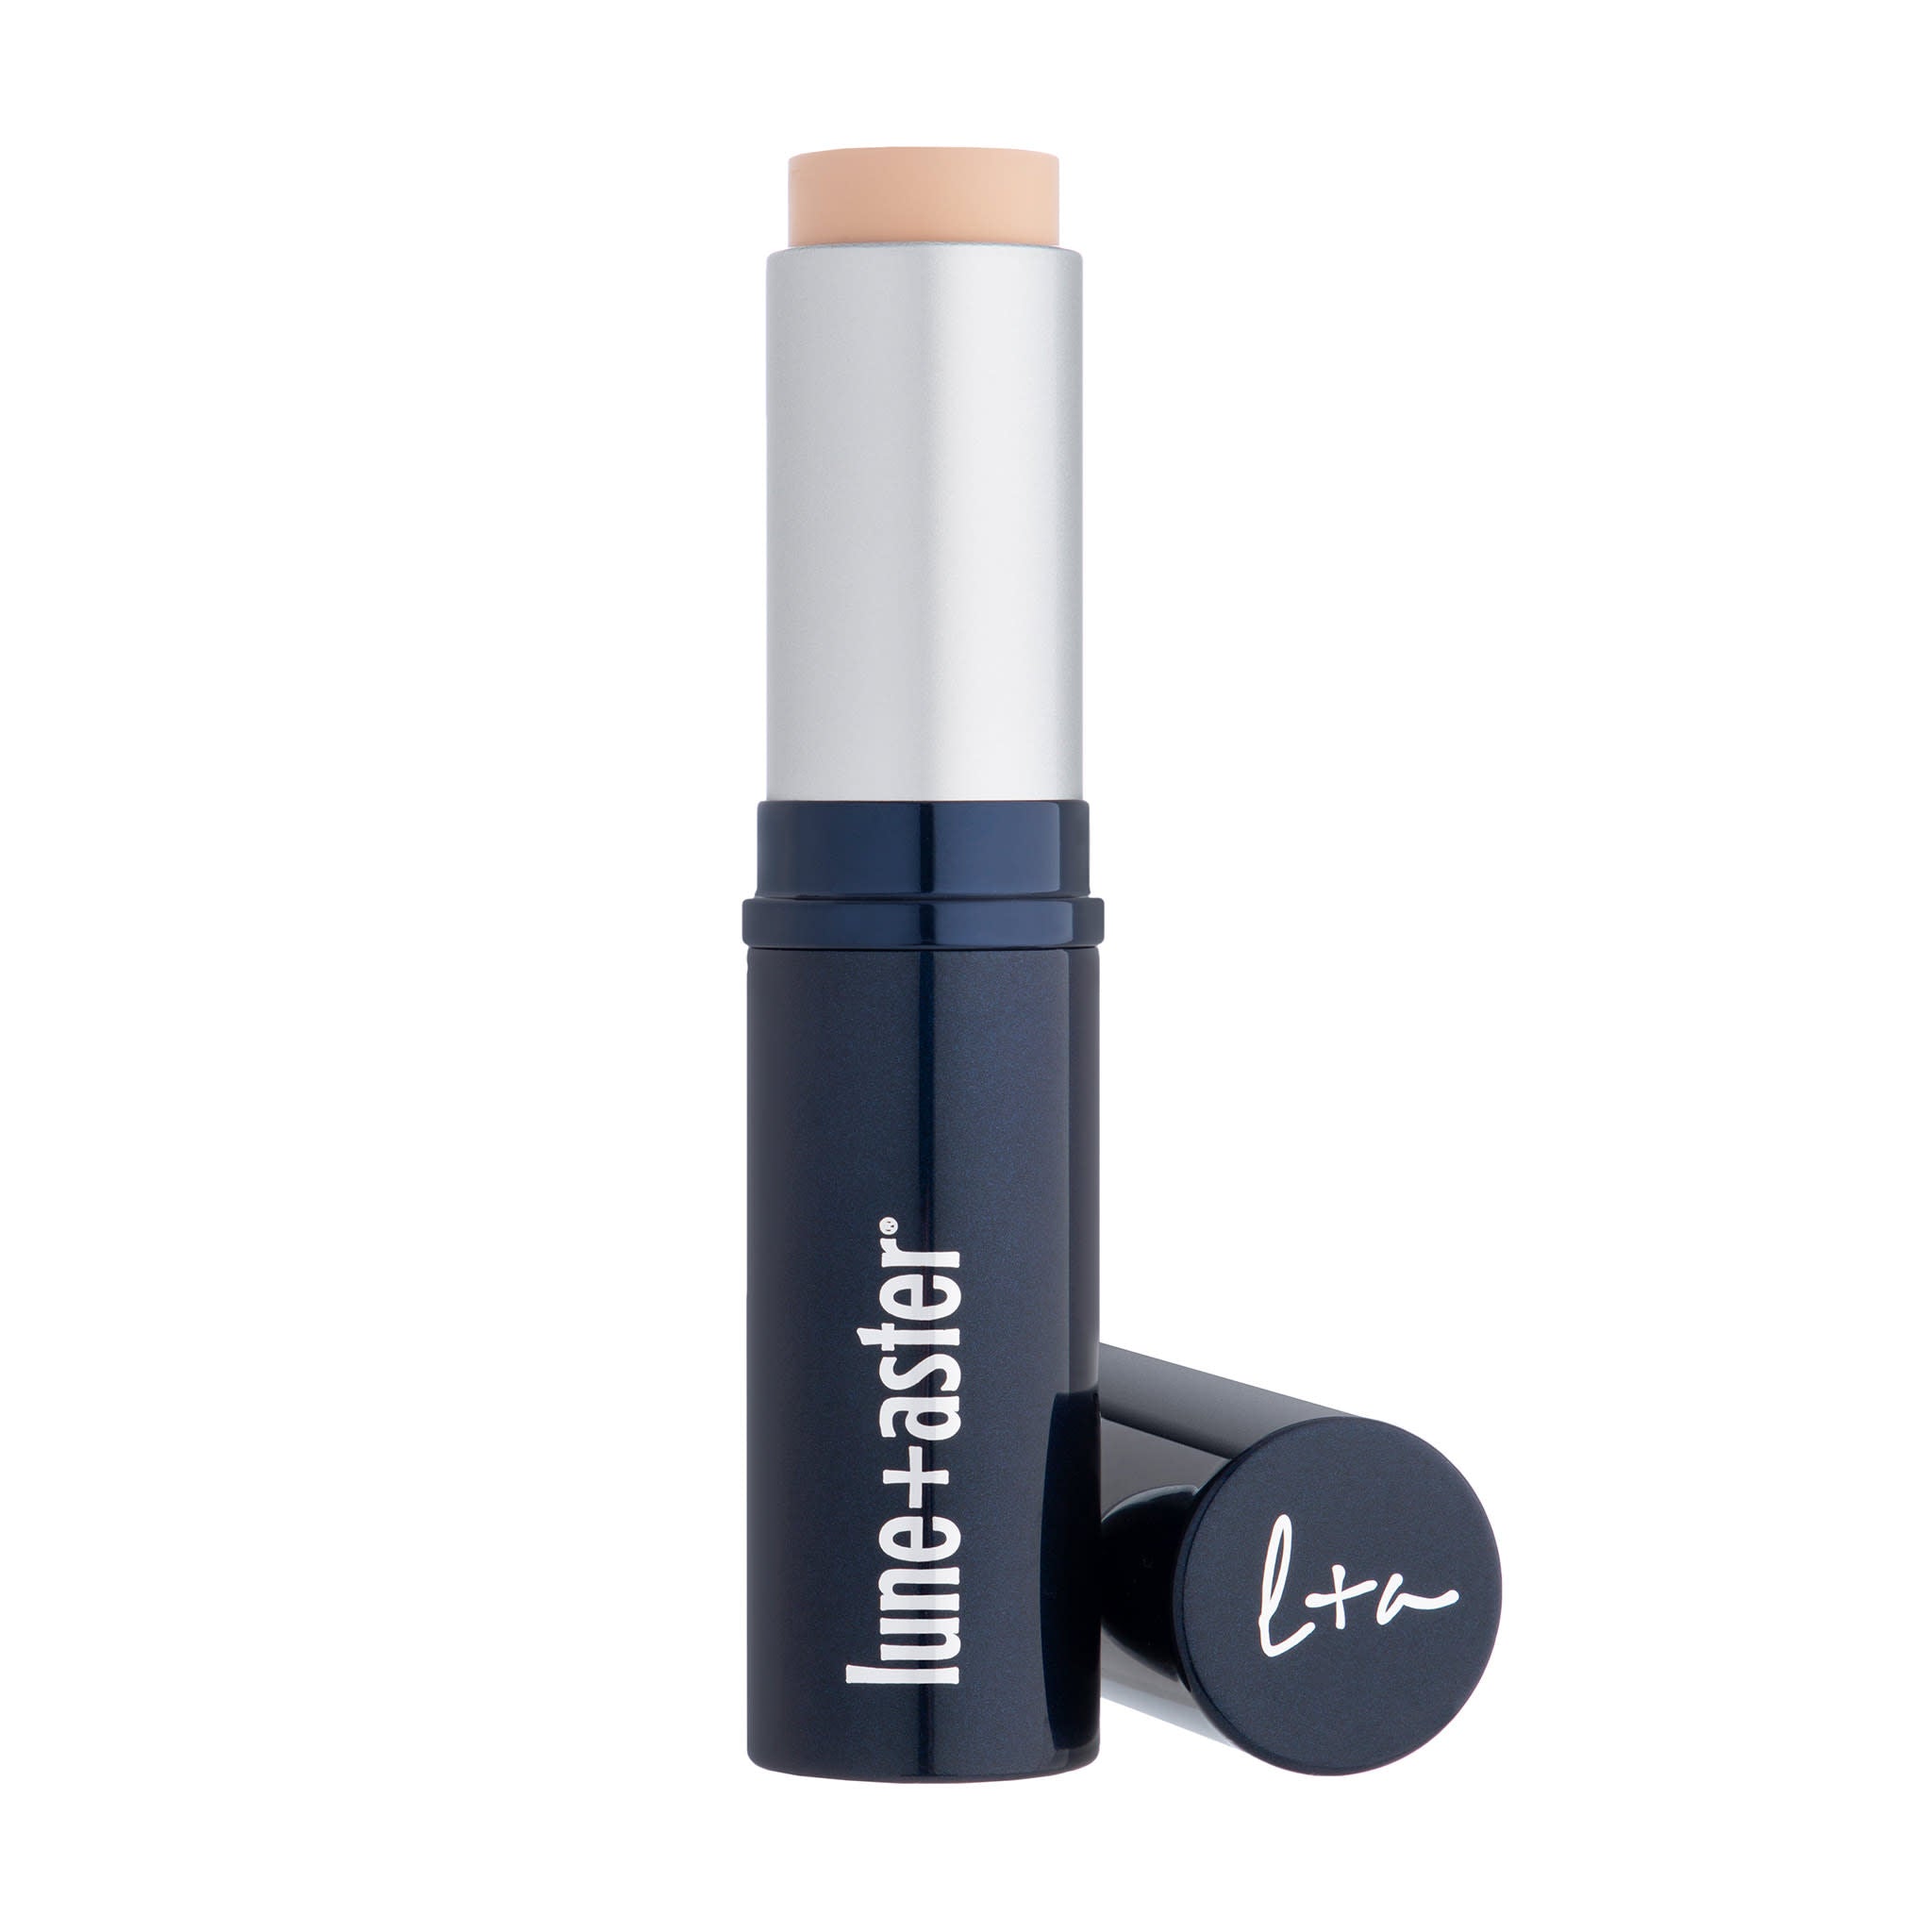 Lune+Aster Dawn to Dusk Foundation Stick Color/Shade variant: Porcelain main image. This product is for light complexions